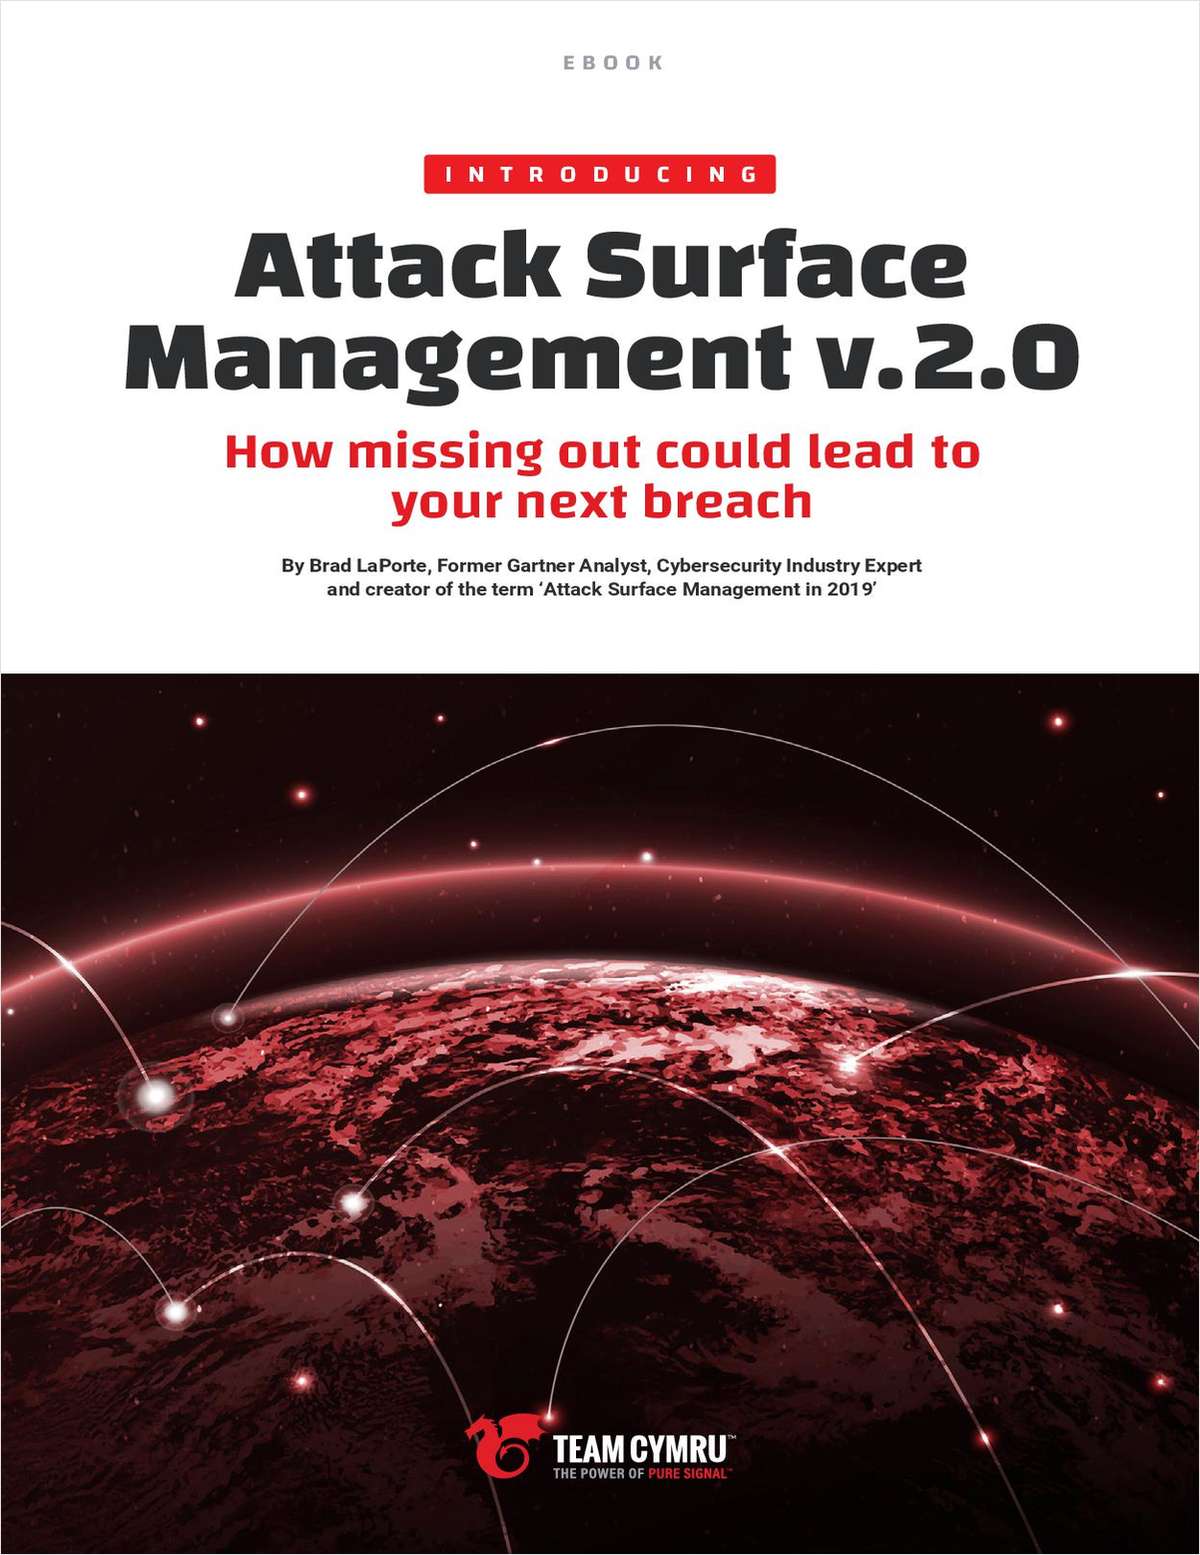 Attack Surface Management v2.0 by Brad LaPorte